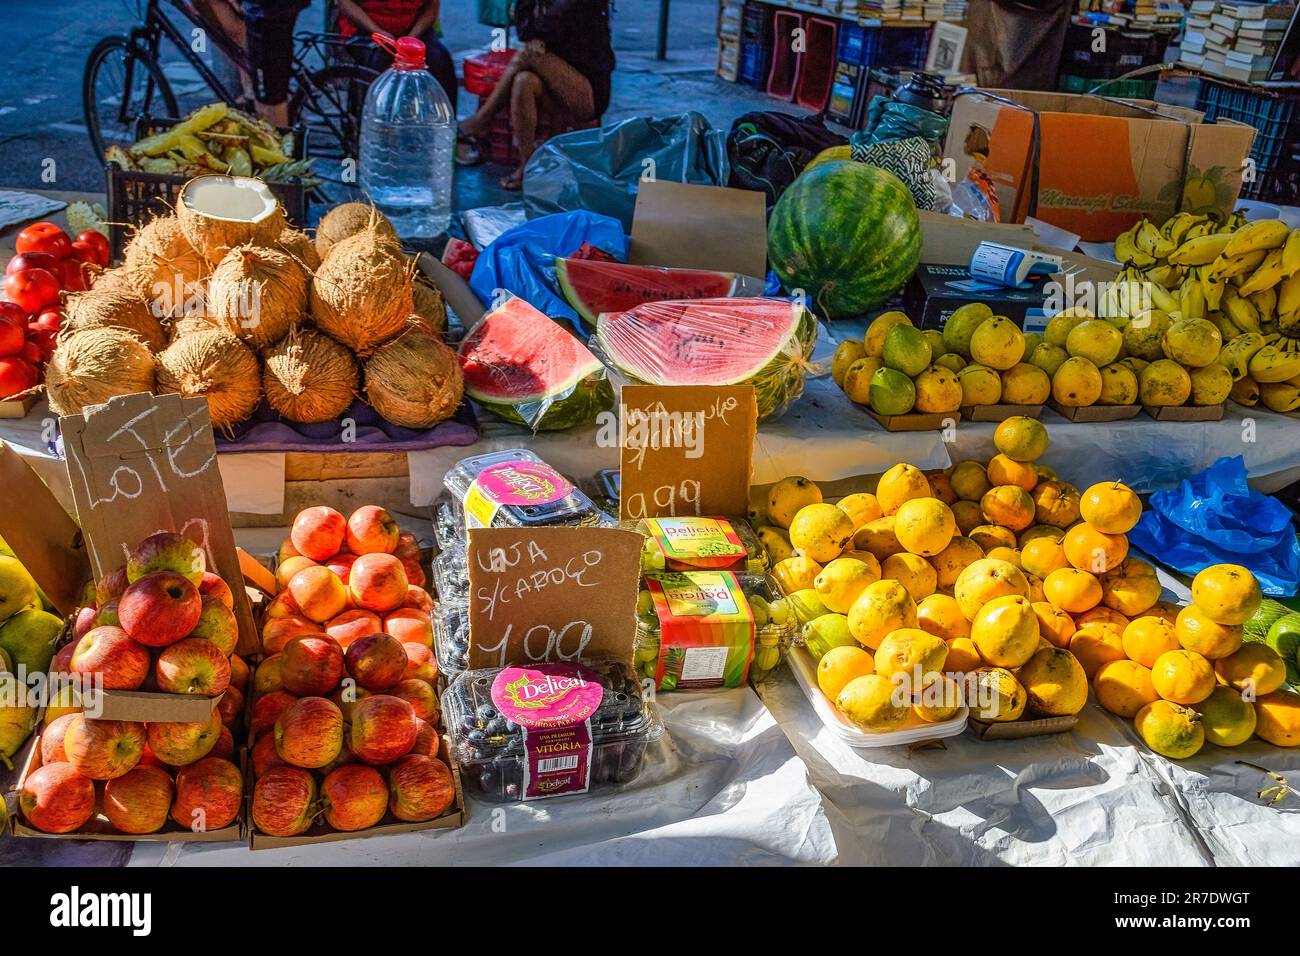 Rio de Janeiro, Brazil - June 8, 2023: Fresh fruits and nuts are displayed for sale. The assortment includes apples, bananas, coconuts, and watermelon Stock Photo